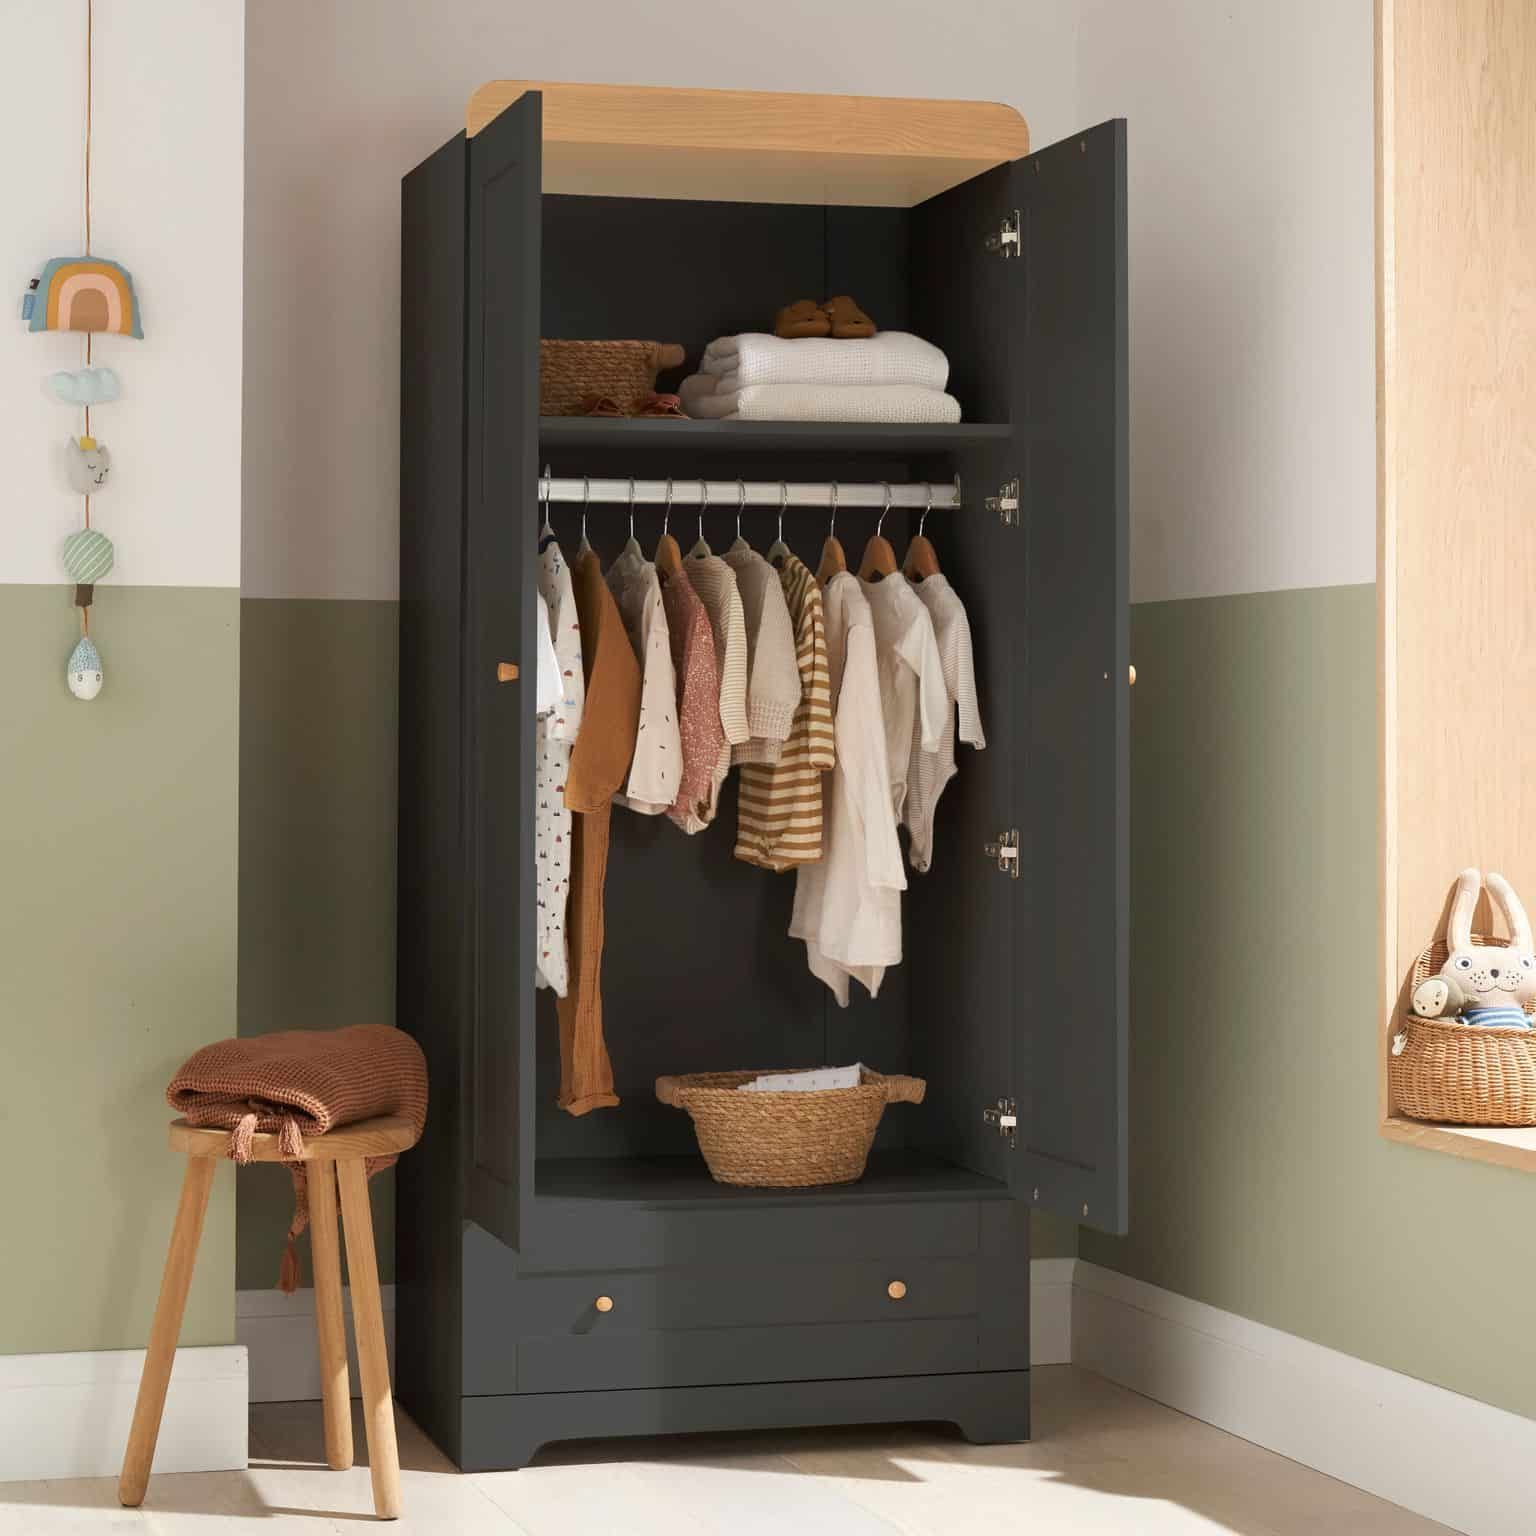 Tutti Bambini Rio Wardrobe – Slate/oak – Baby And Child Store With Double Rail Nursery Wardrobes (View 7 of 20)